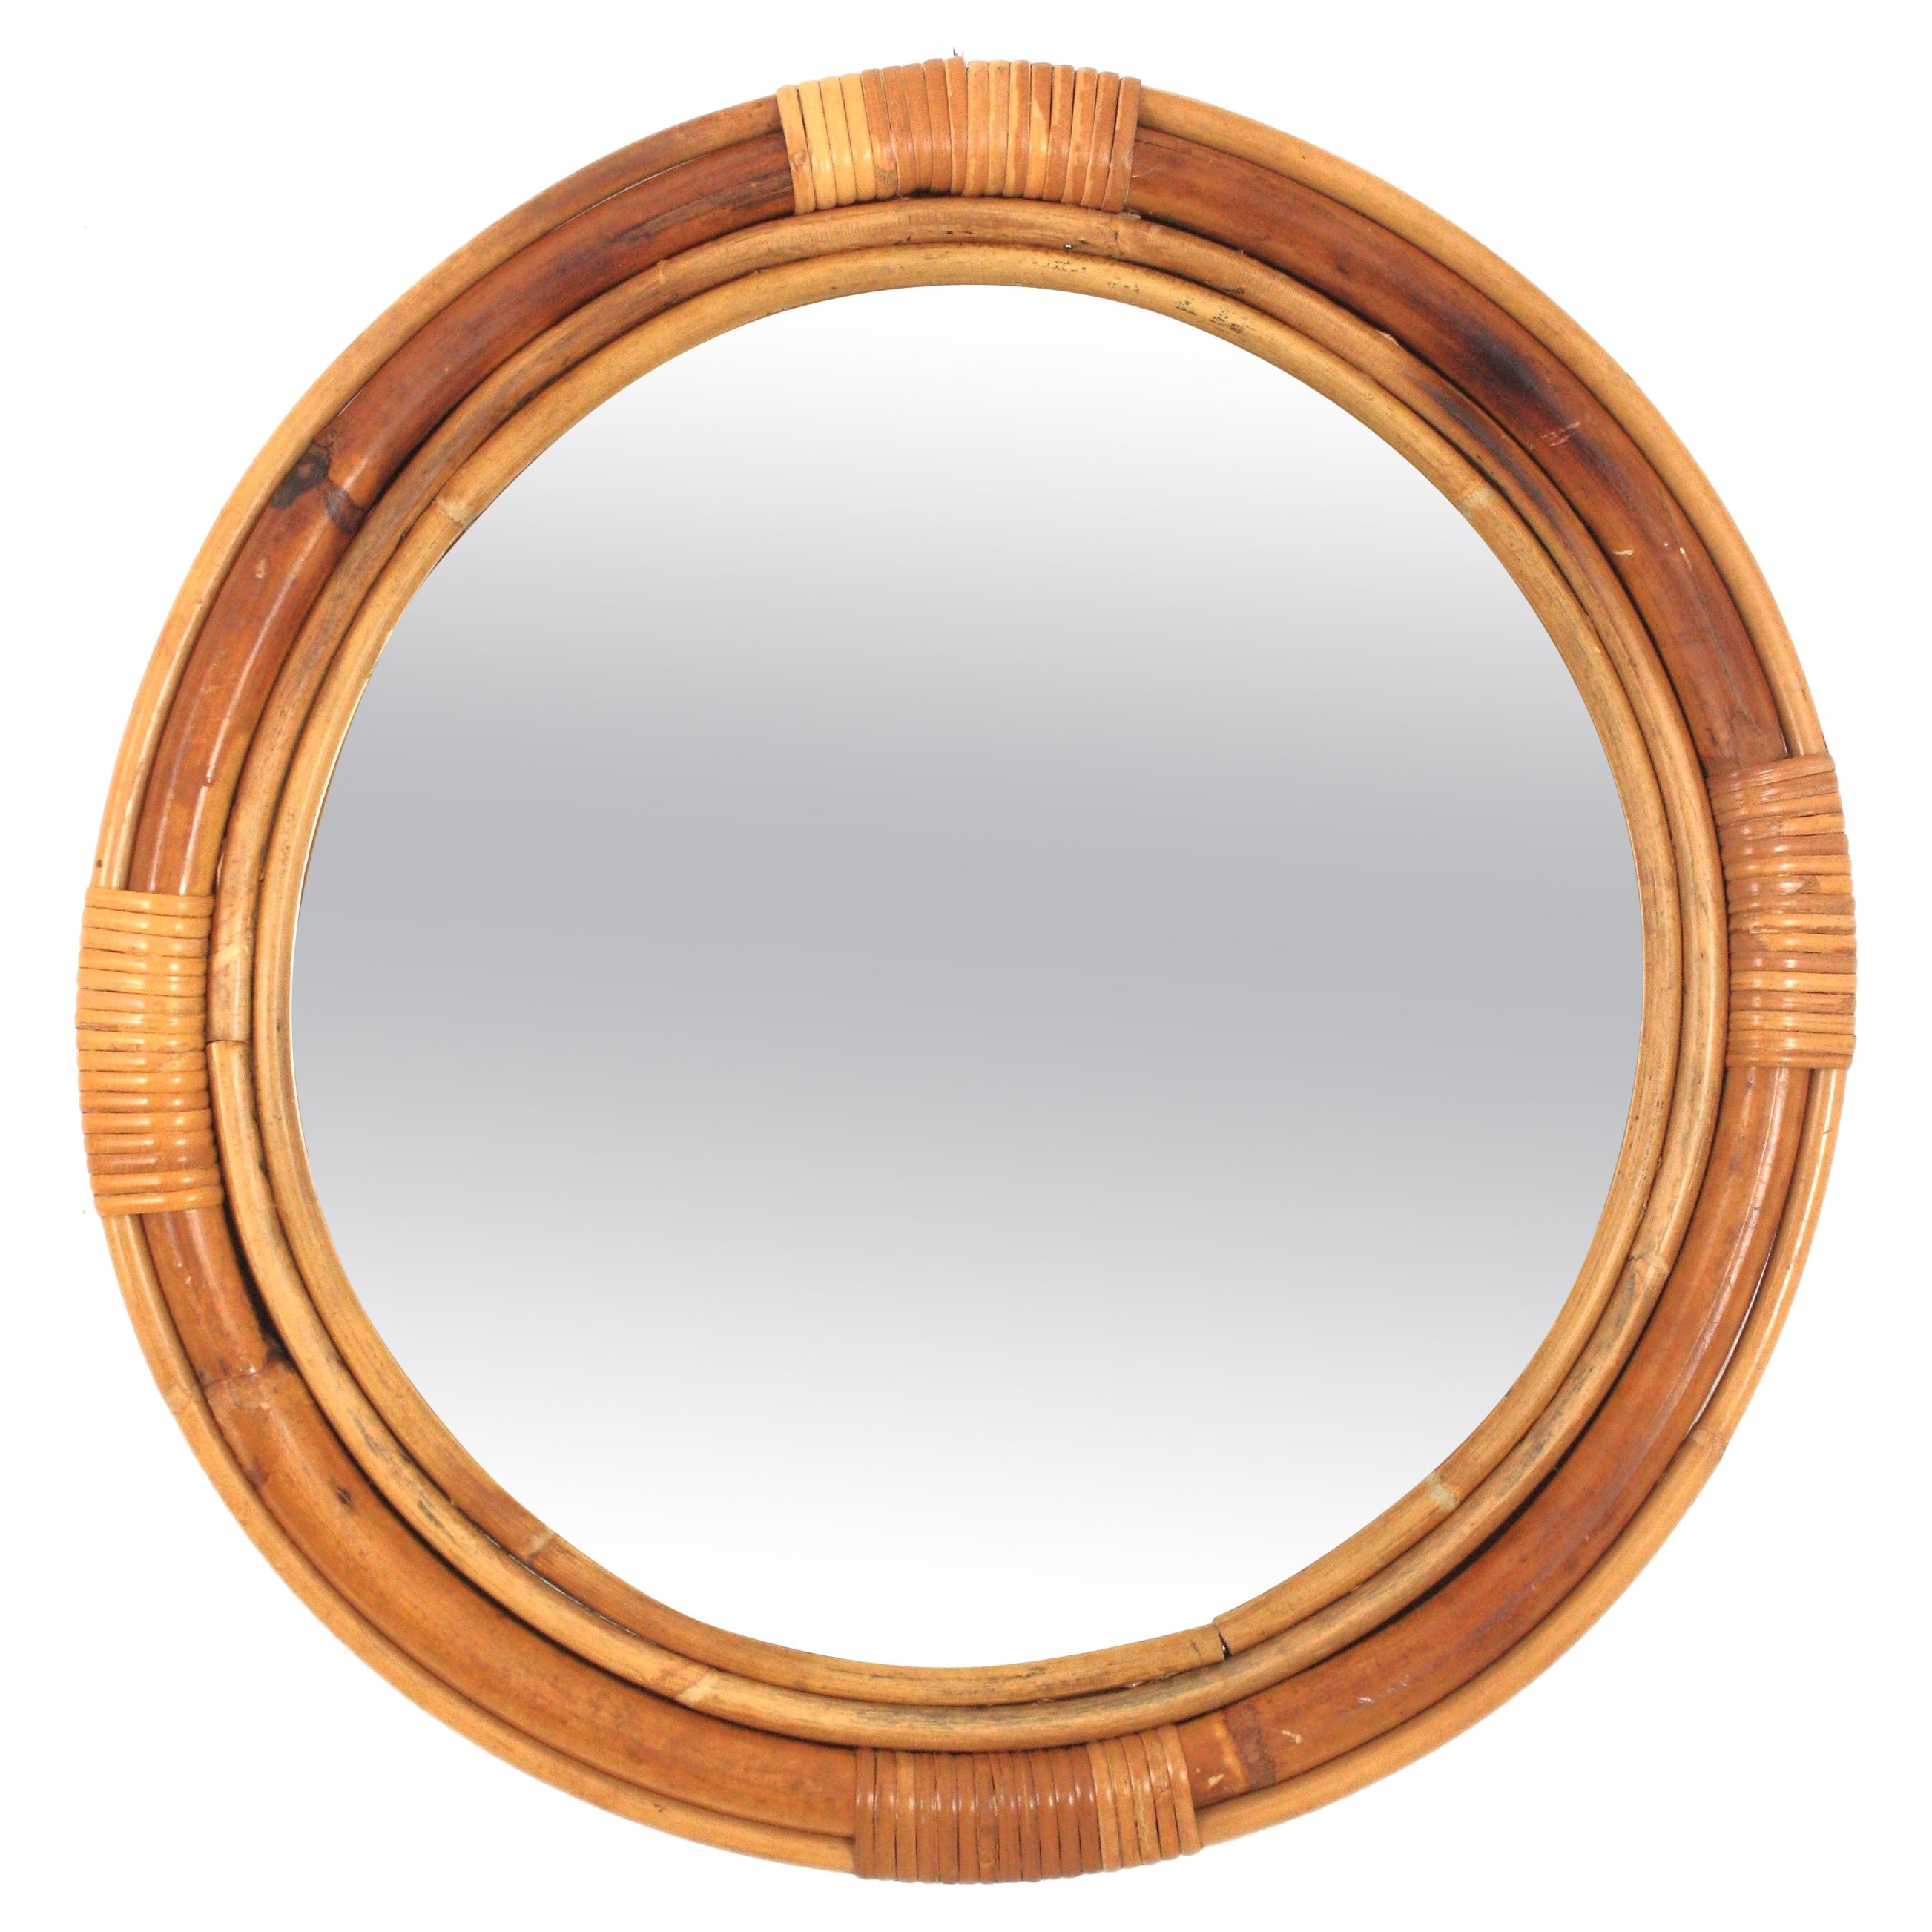 Spanish Rattan Bamboo Round Wall Mirror, 1950s For Sale